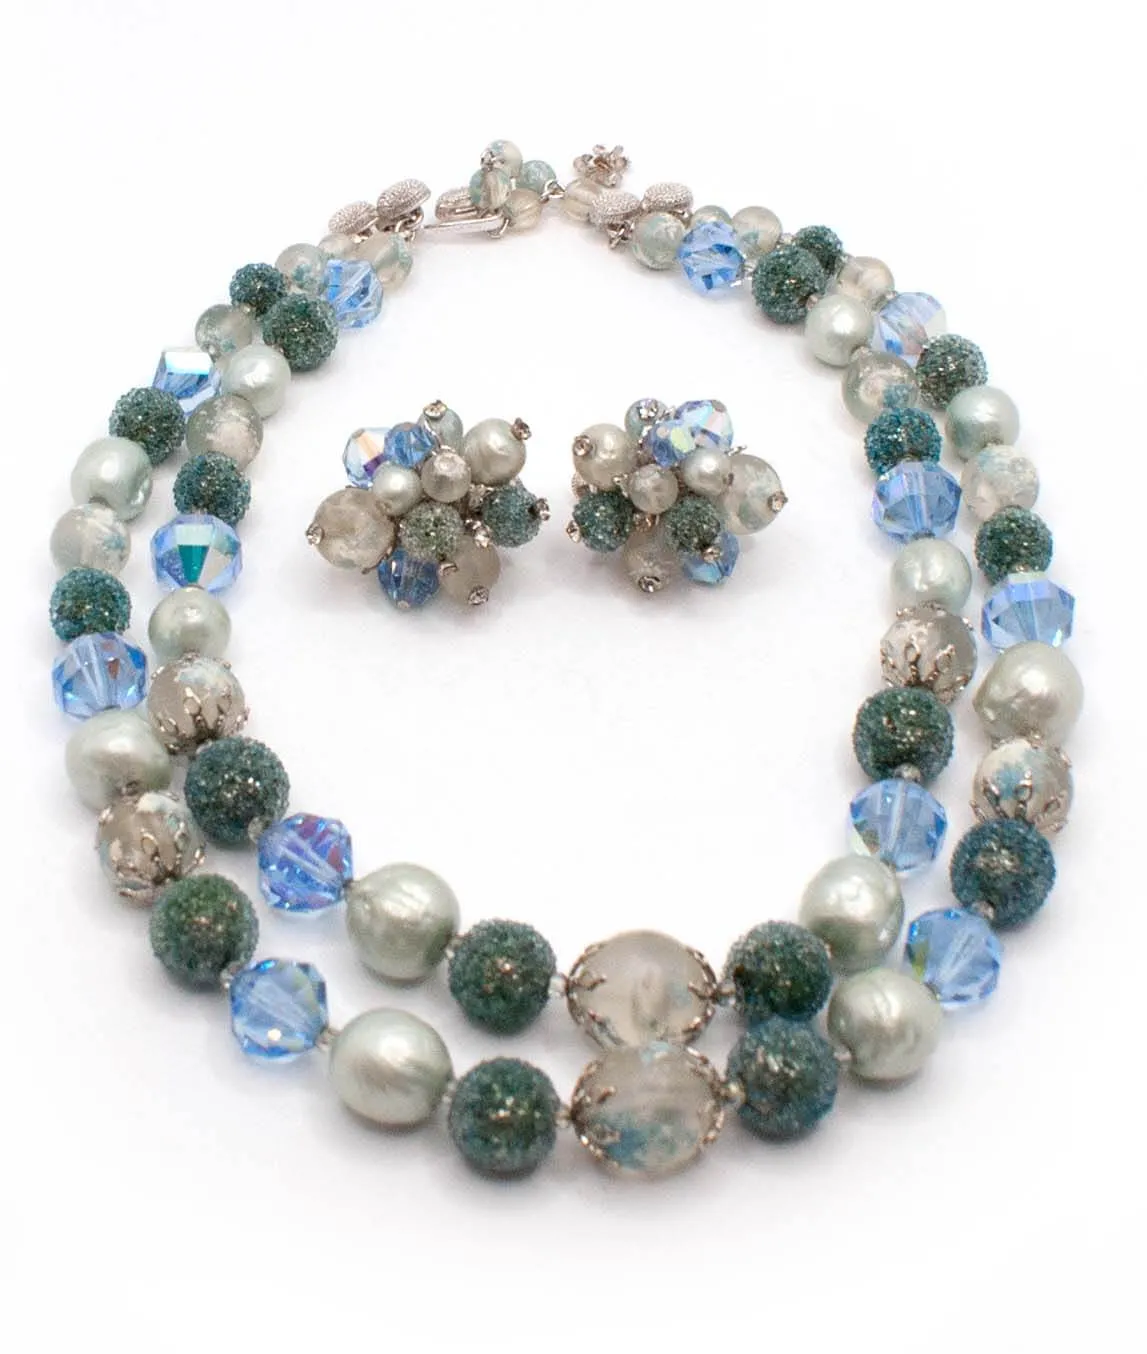 Vendôme Necklace and Earrings blue green and white beads